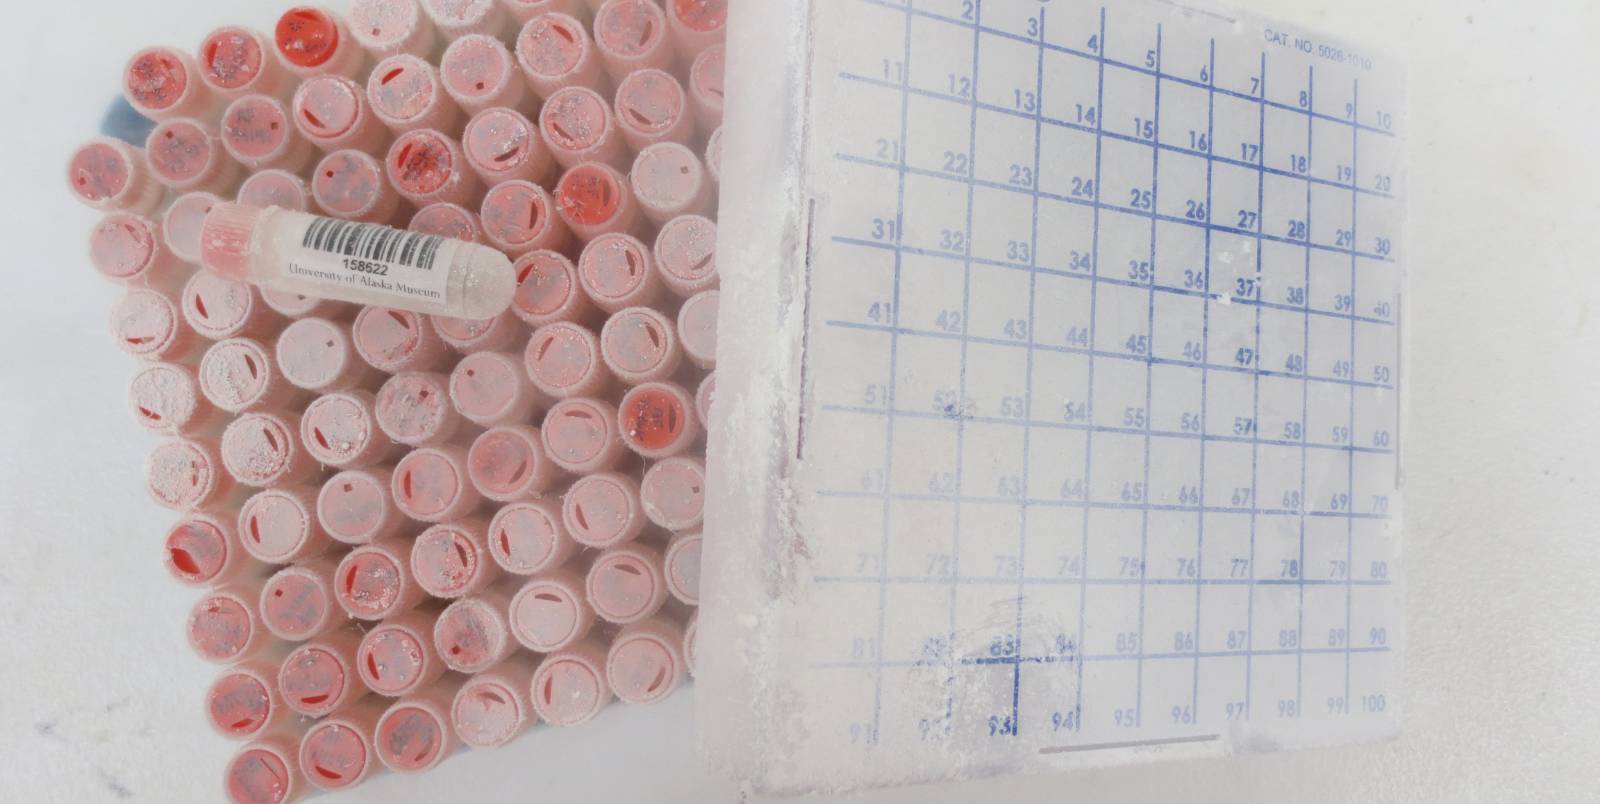 A full box of frost covered cryovials.